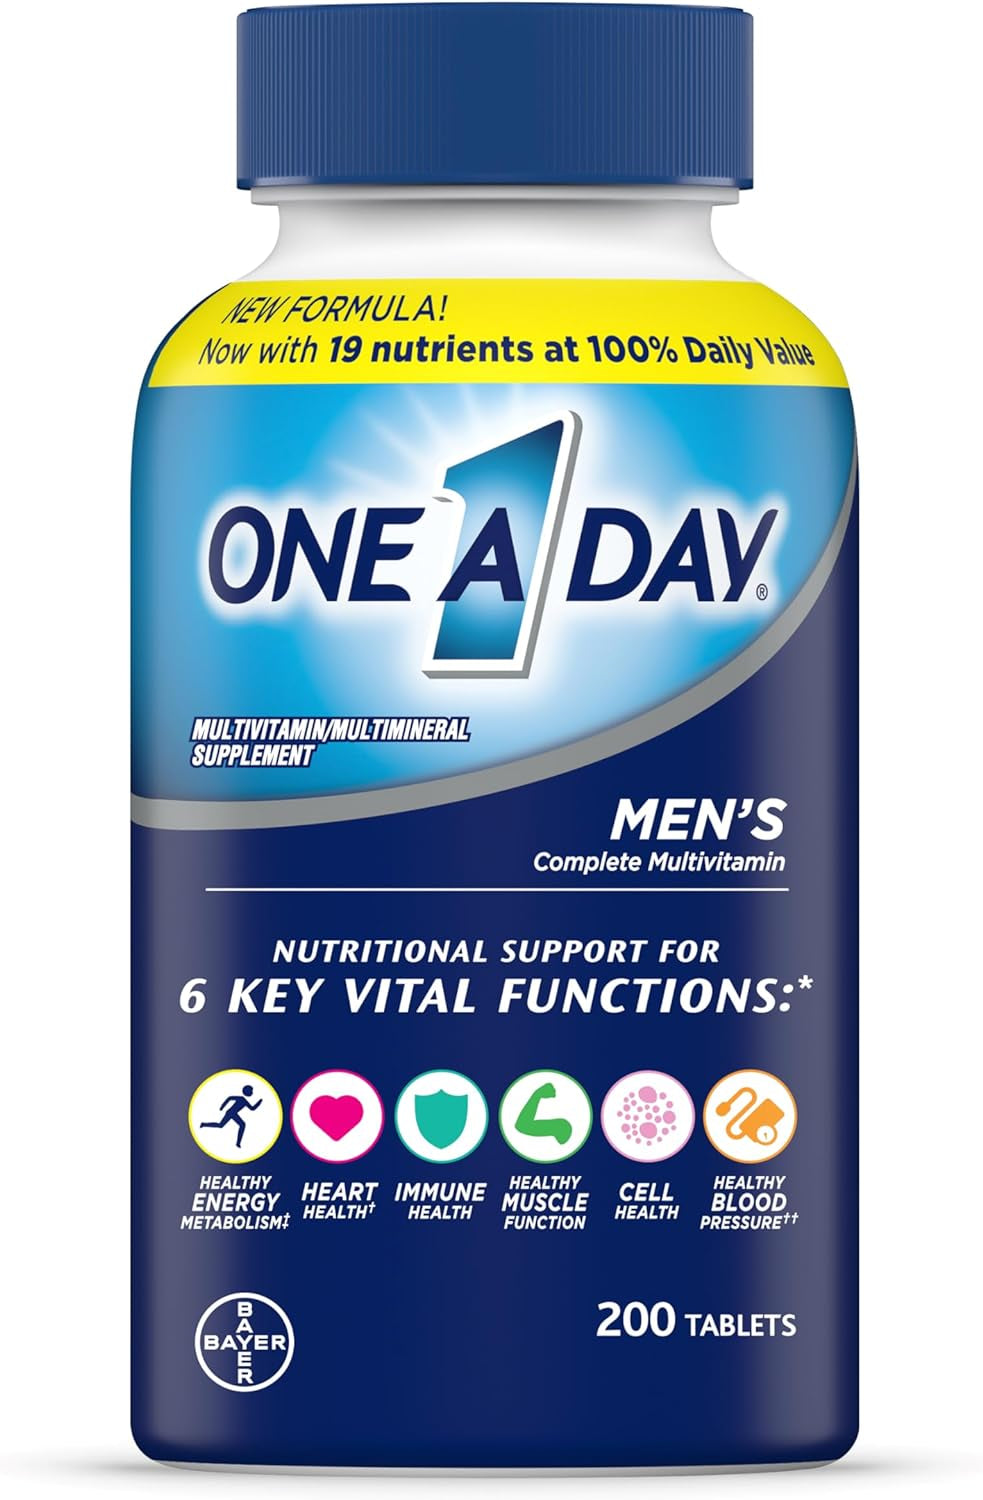 Men’S Multivitamin, Supplement Tablet with Vitamin A, Vitamin C, Vitamin D, Vitamin E and Zinc for Immune Health Support, B12, Calcium & More, 200 Count (Packaging May Vary), Pack of 1